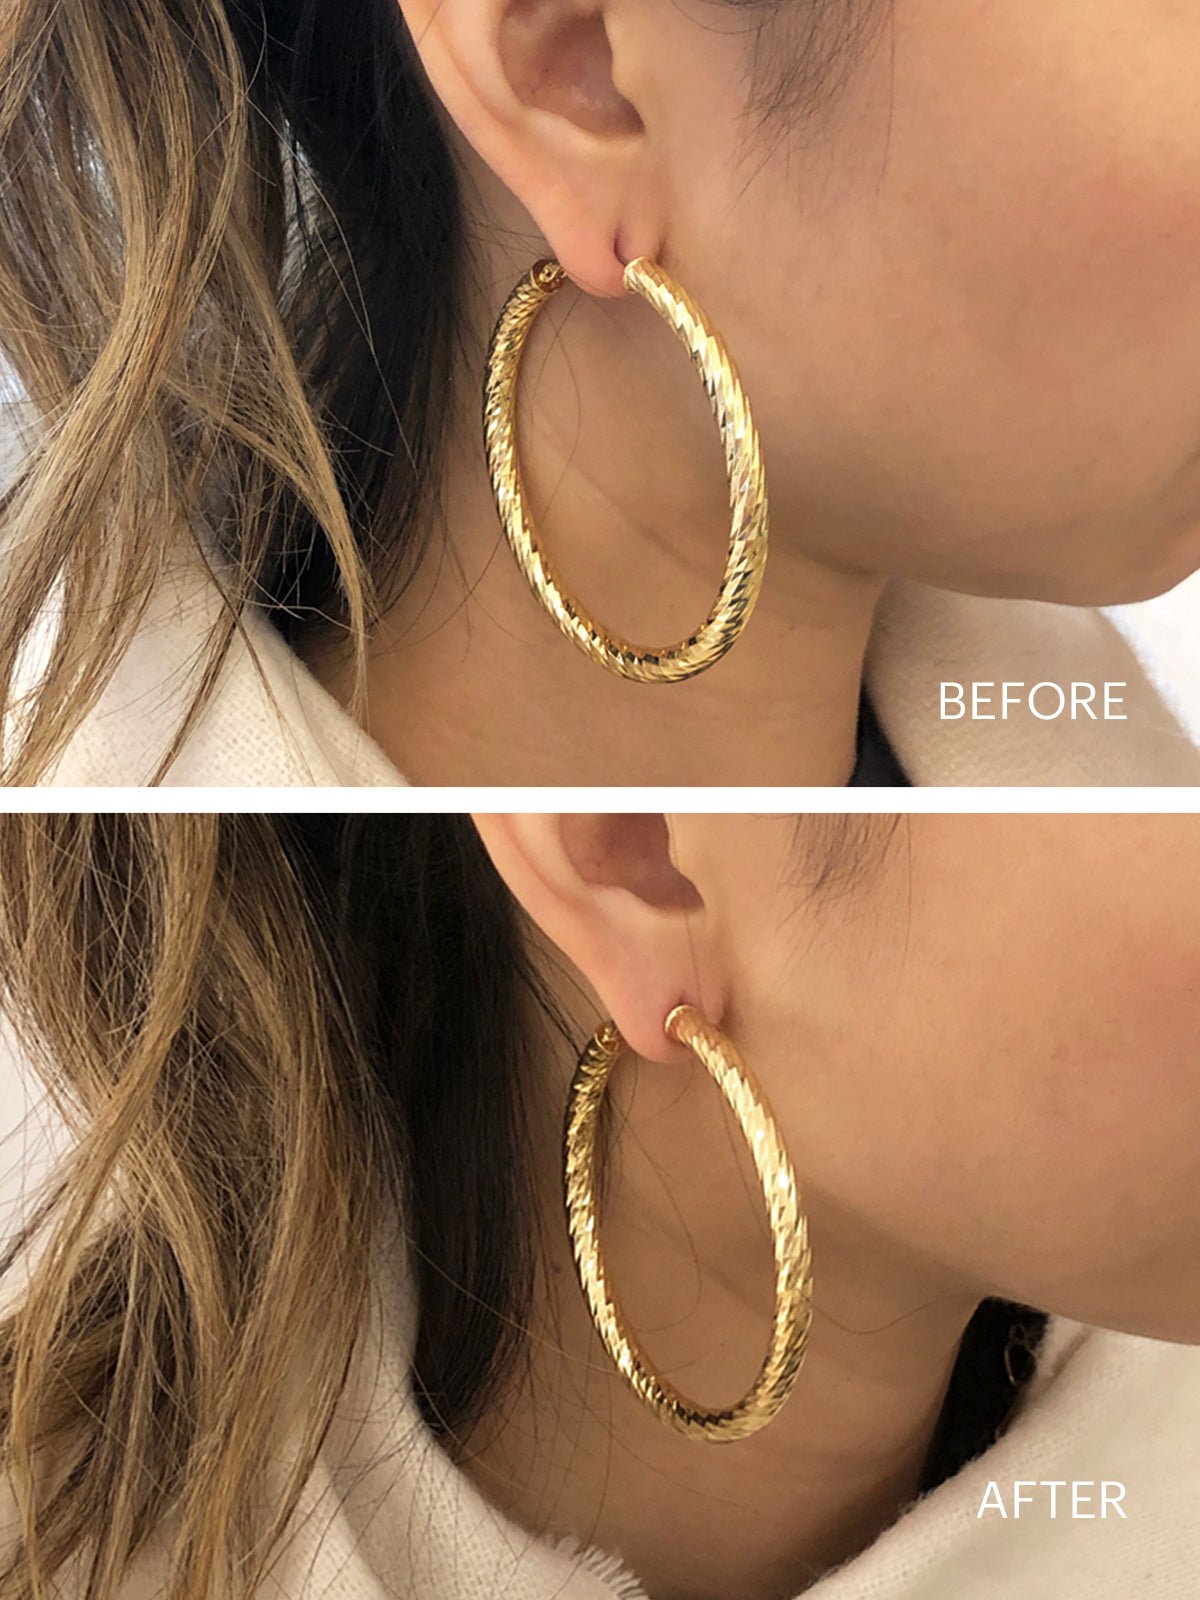 Lobe Wonder- Earring Support Patches.